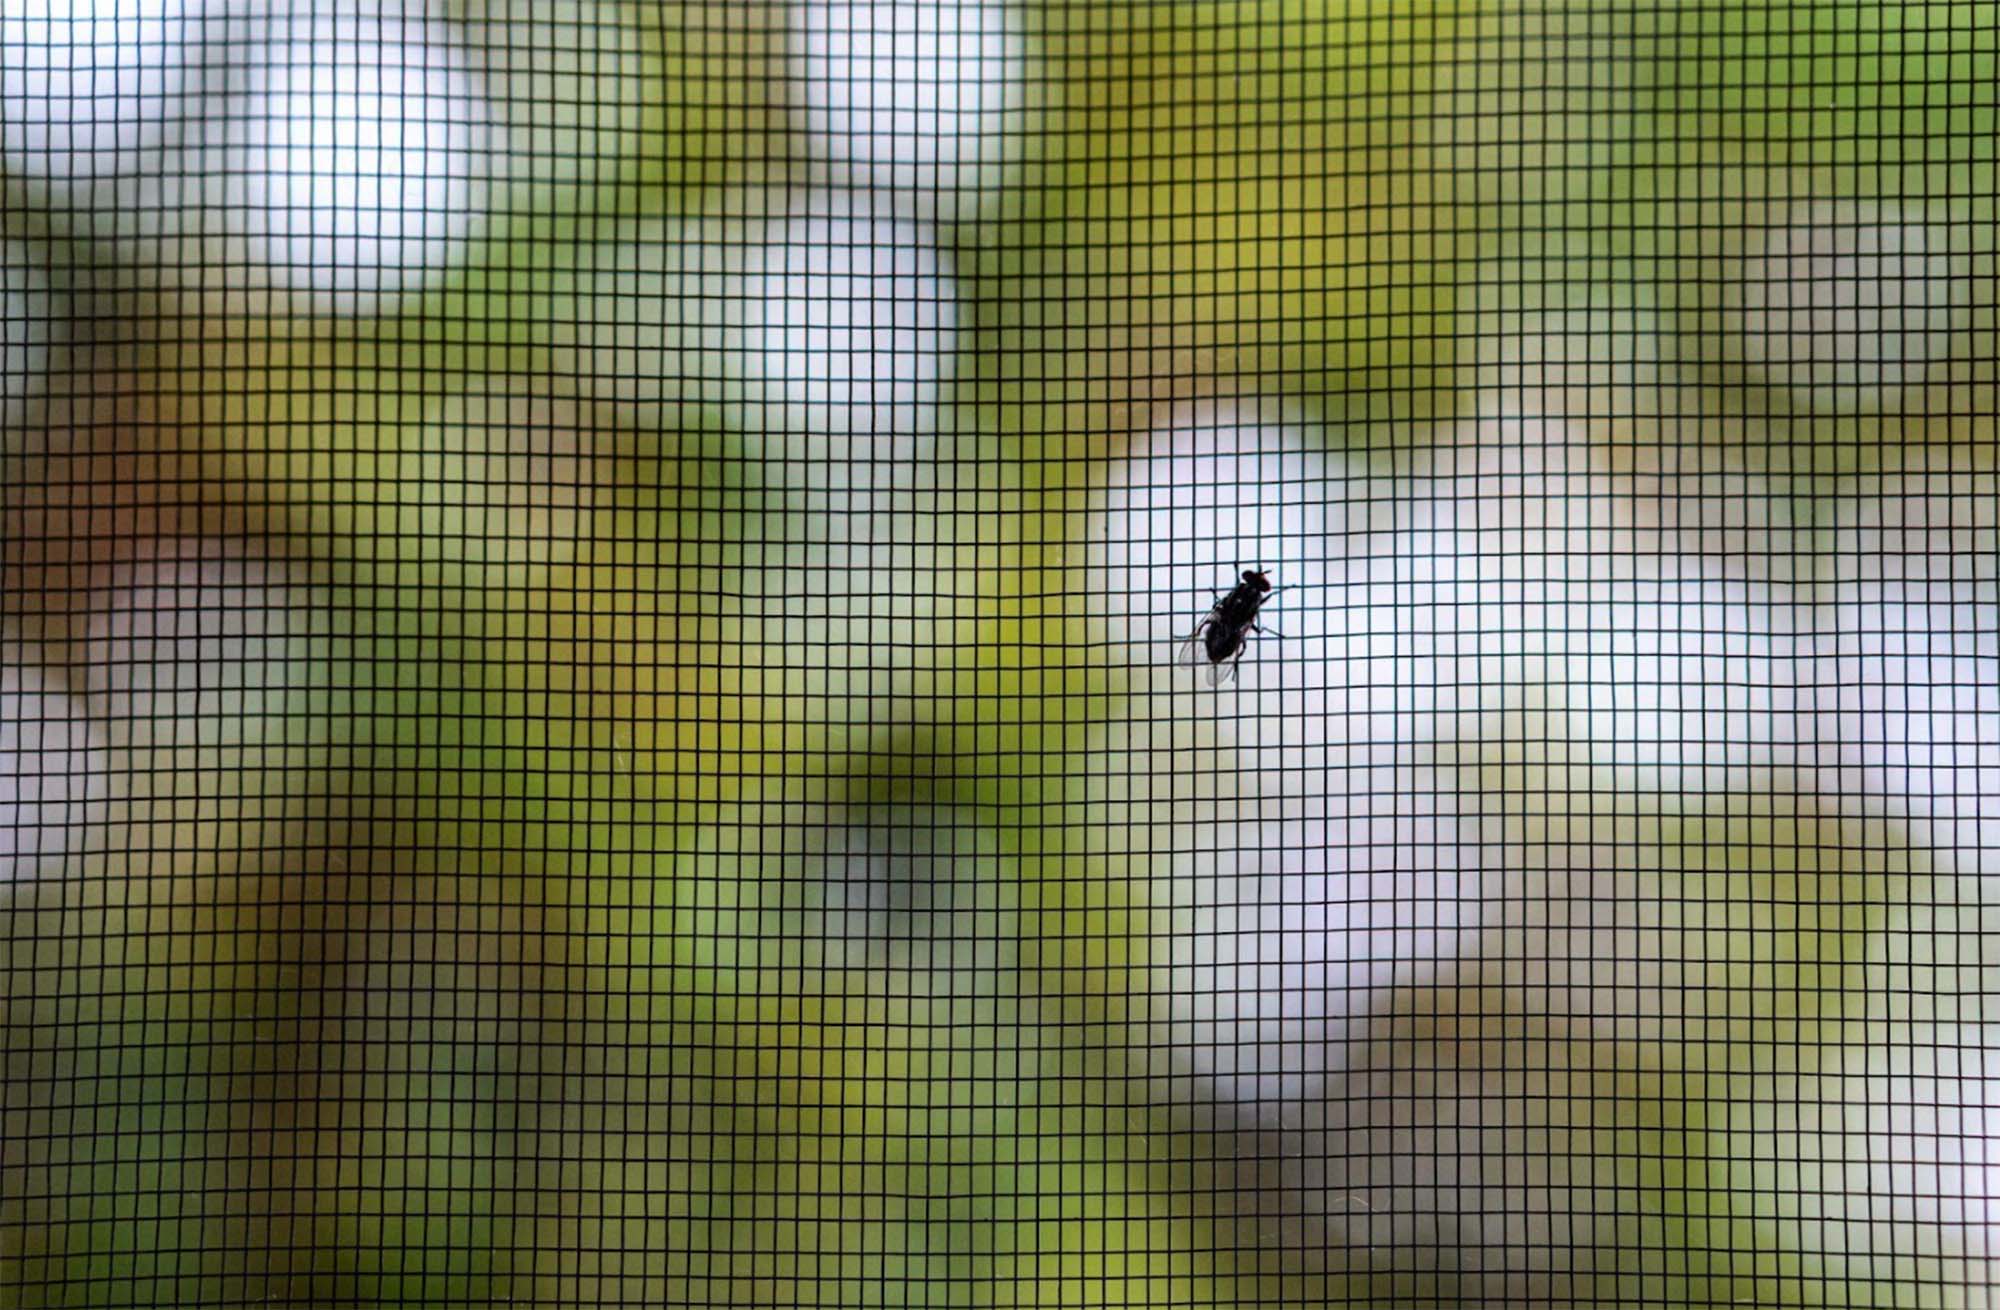 fly on screen